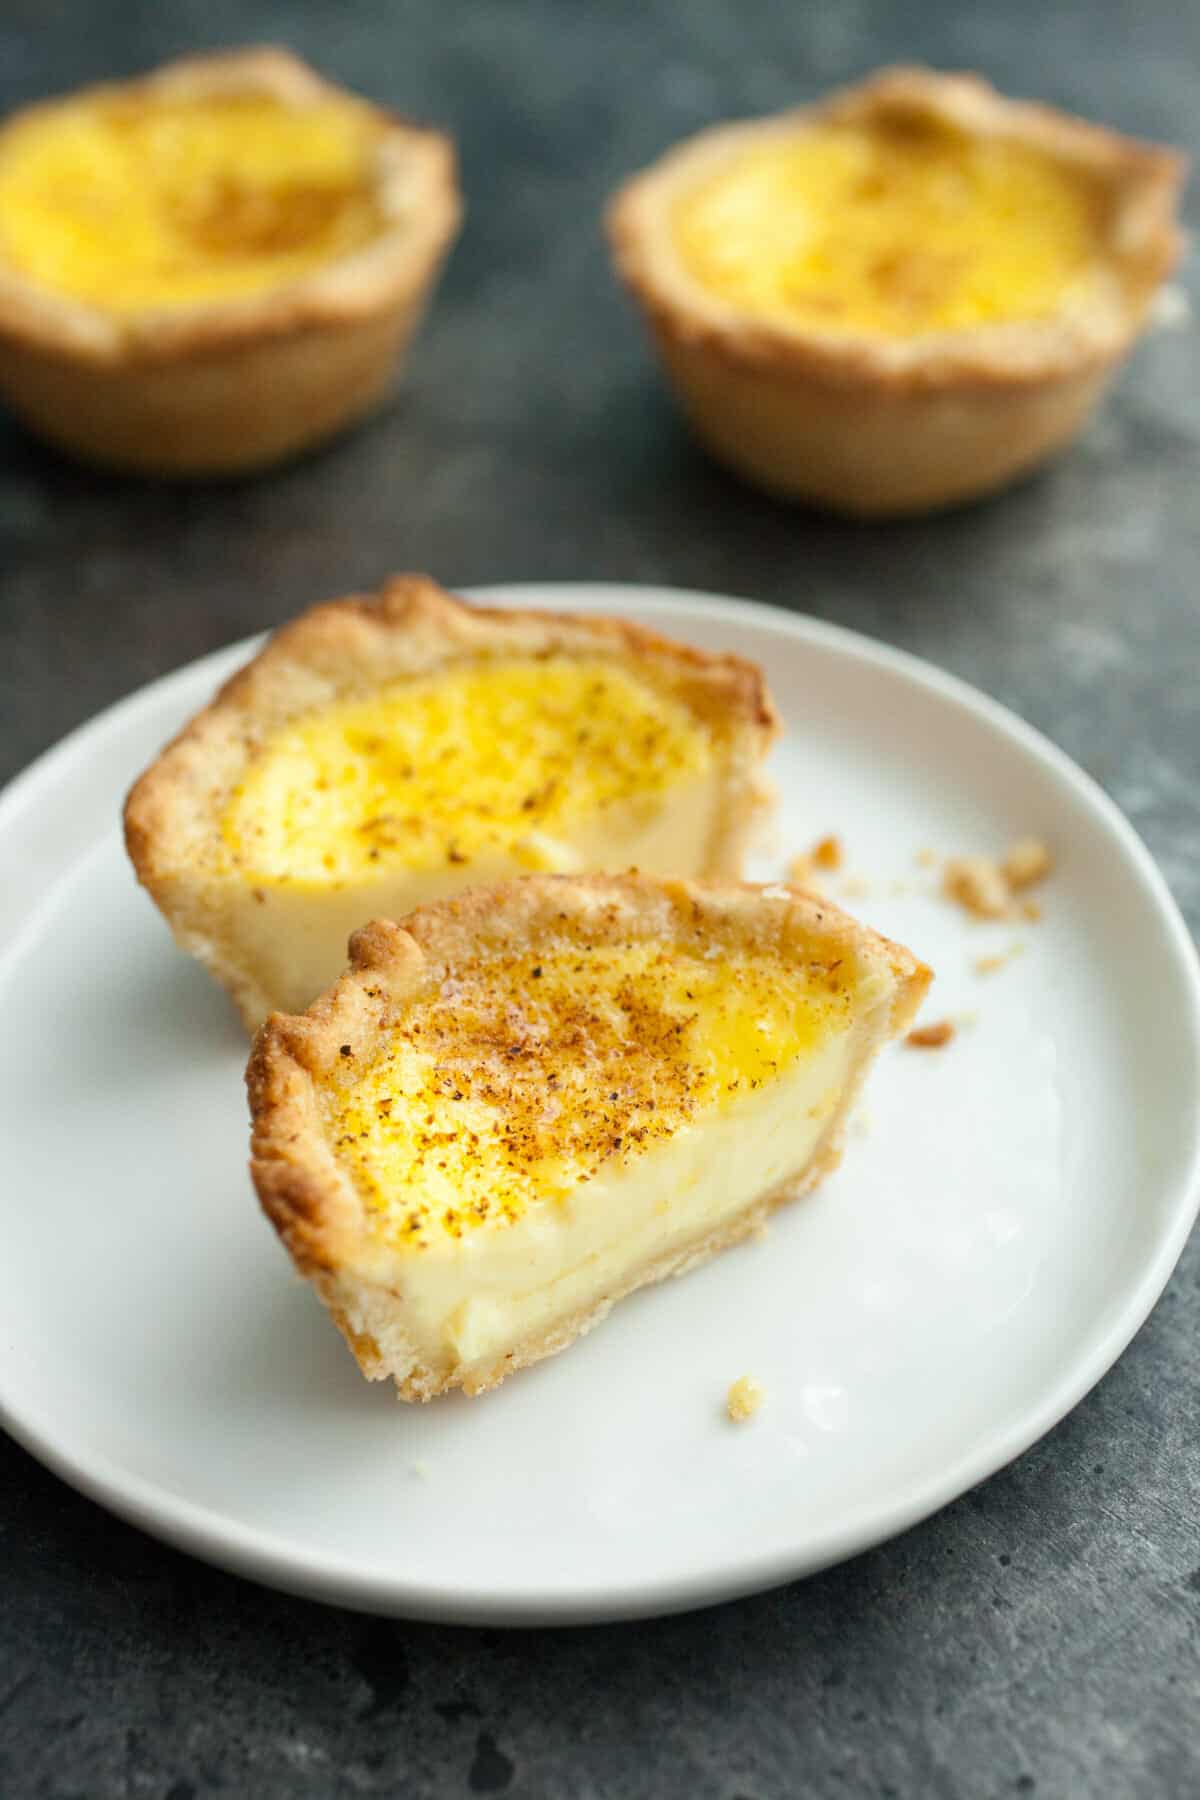 Egg Custard Tarts: Inspired by The Great British Baking Show, I tried my hand at a classic Egg Custard Tart. The results were mostly successful and definitely delicious! | macheesmo.com